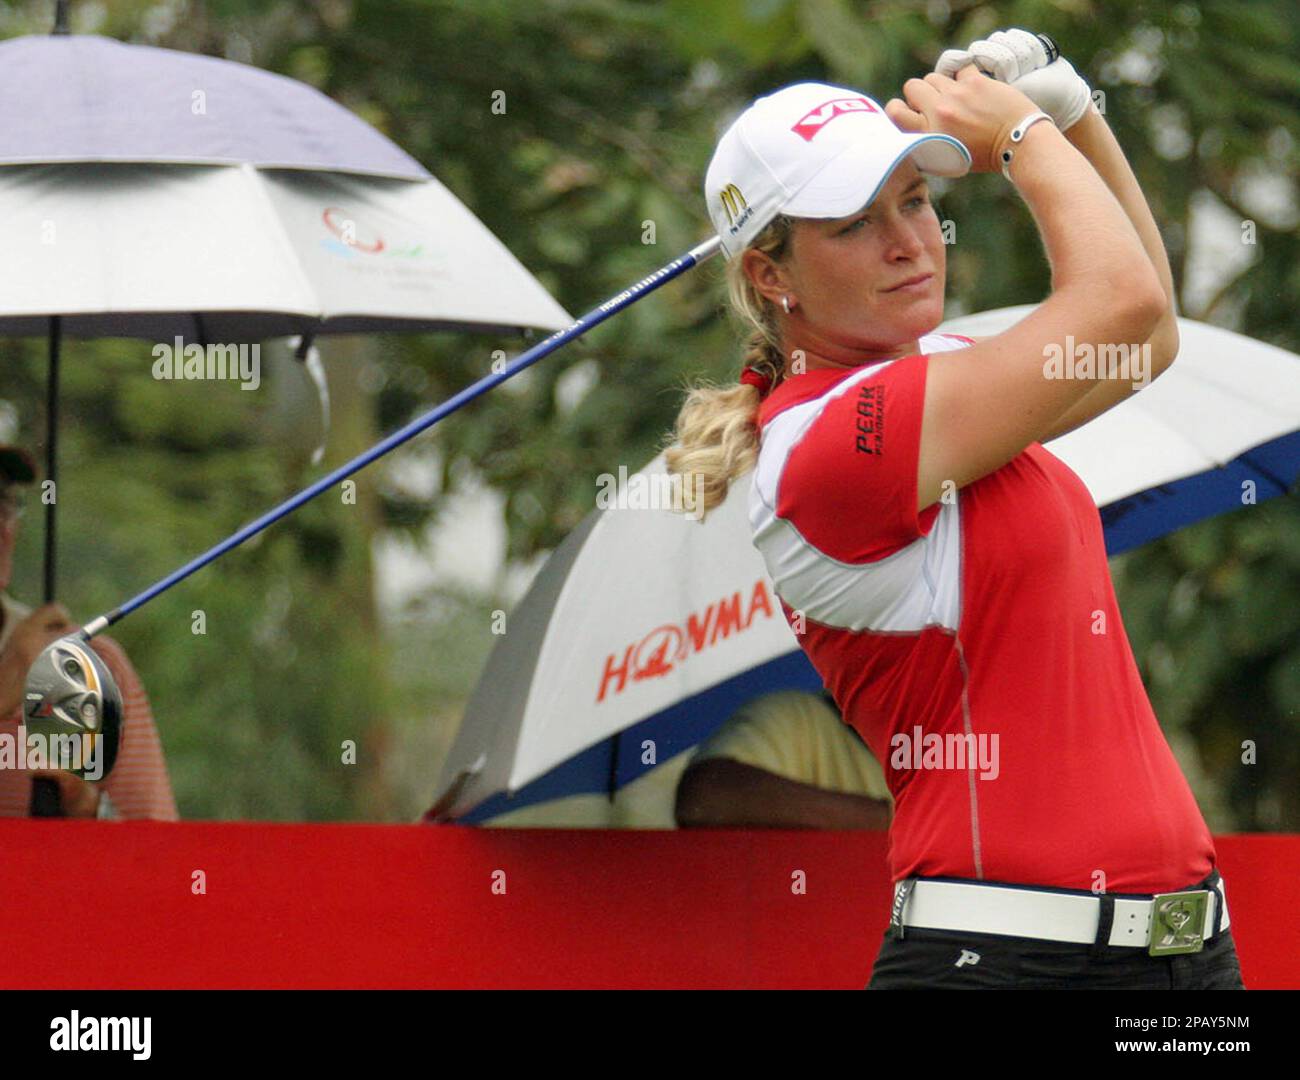 Norways Suzann Pettersen tees off from the 10th hole during second round of the Honda LPGA Thailand 2007 tournament in Chonburi south of Bangkok on Friday, Oct